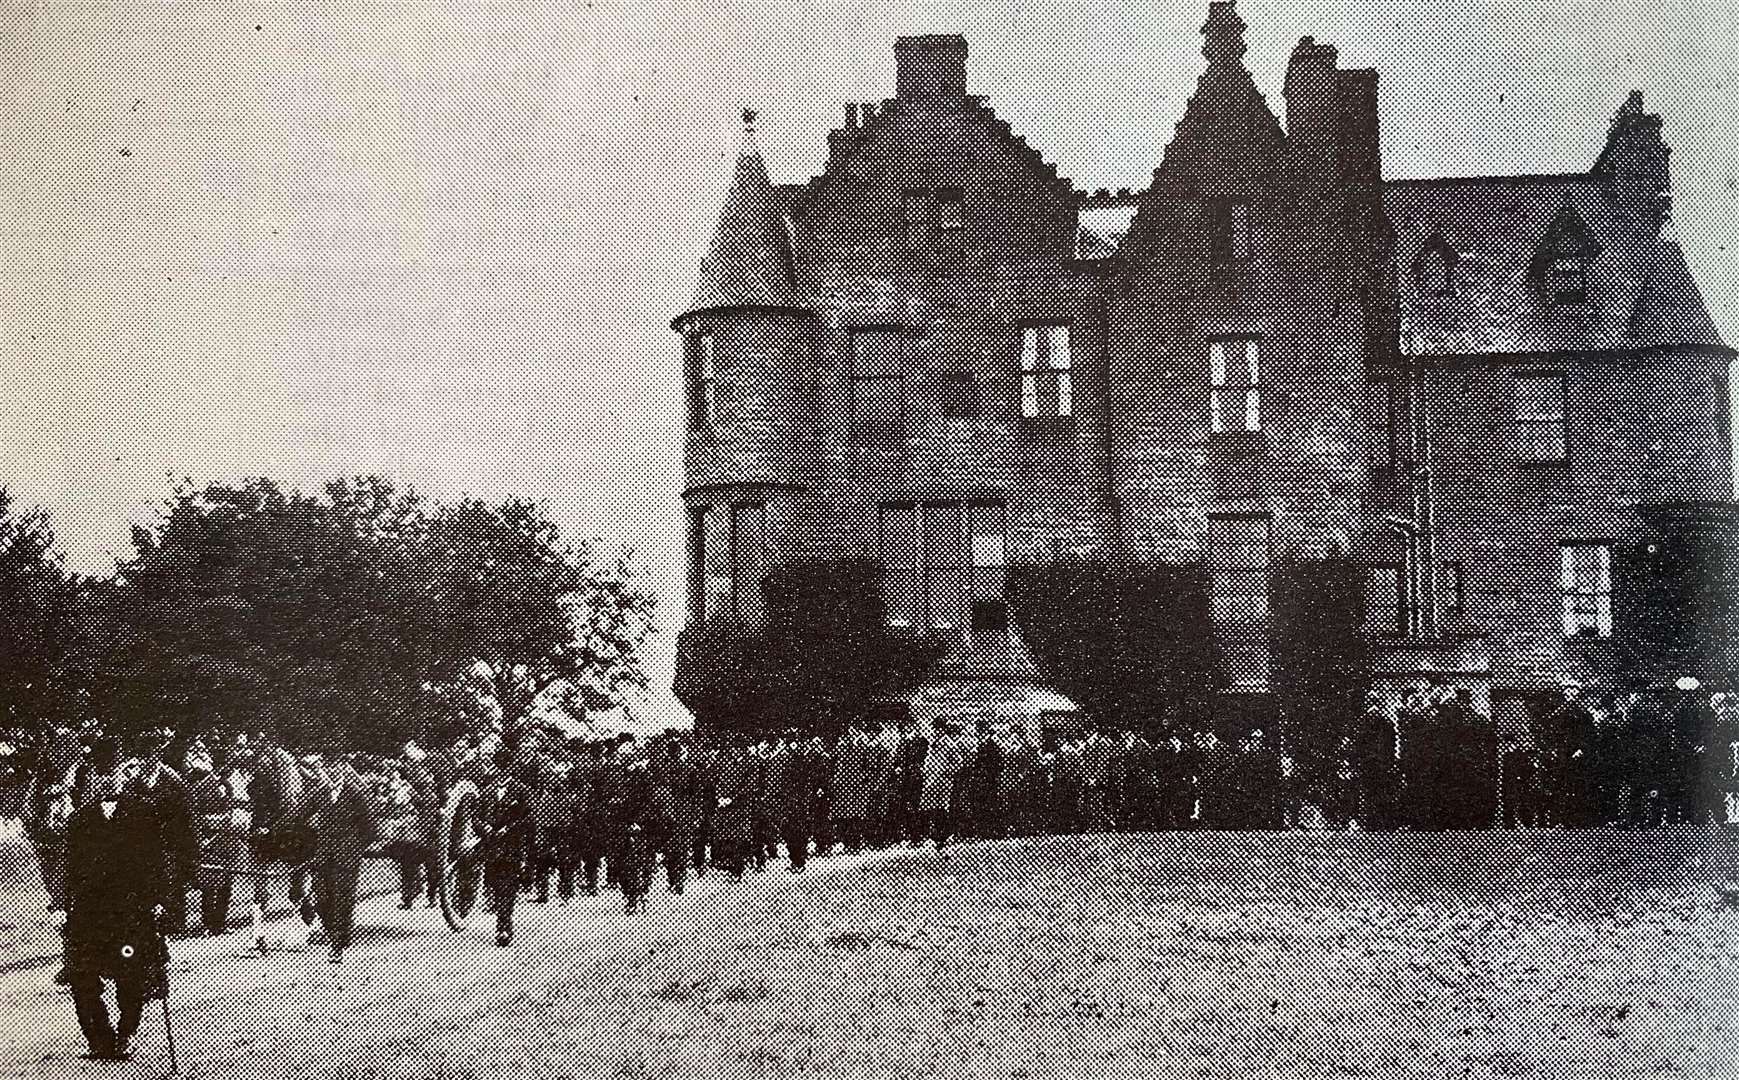 The cortege leaving Lord Horne's home at Stirkoke House.